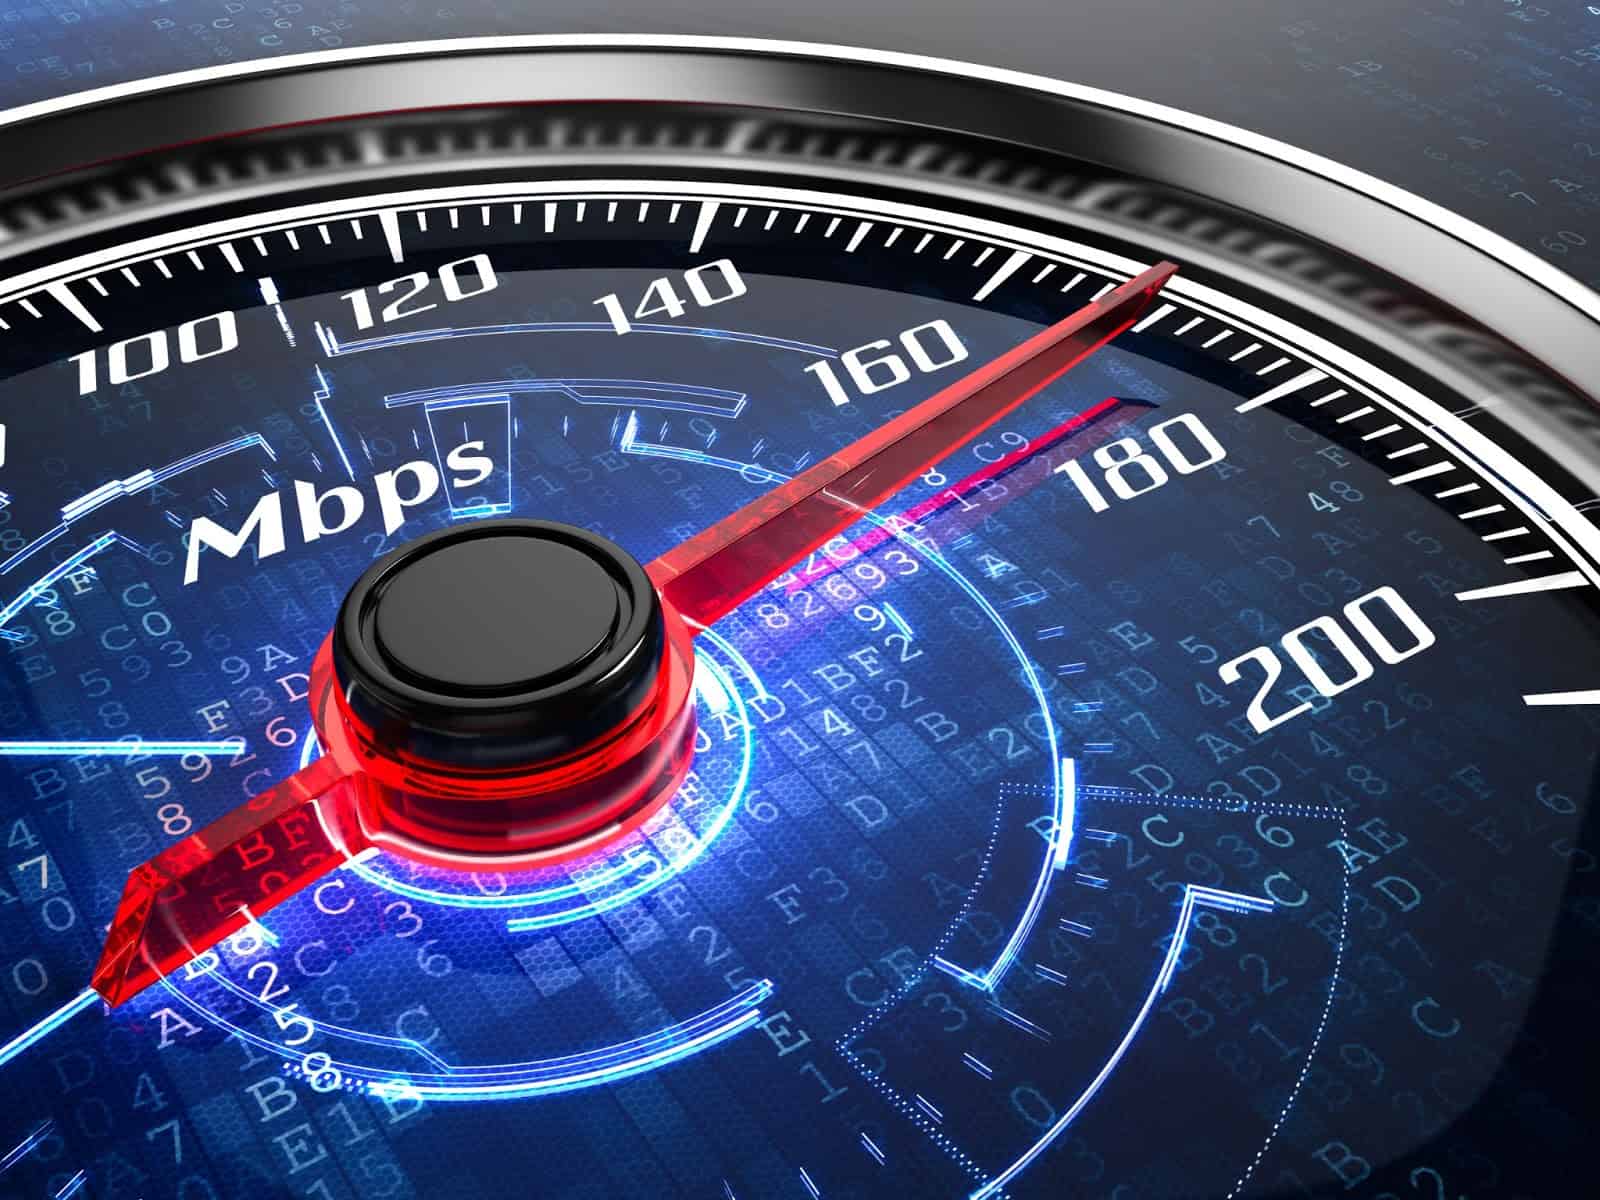 What is a Good Internet Speed?